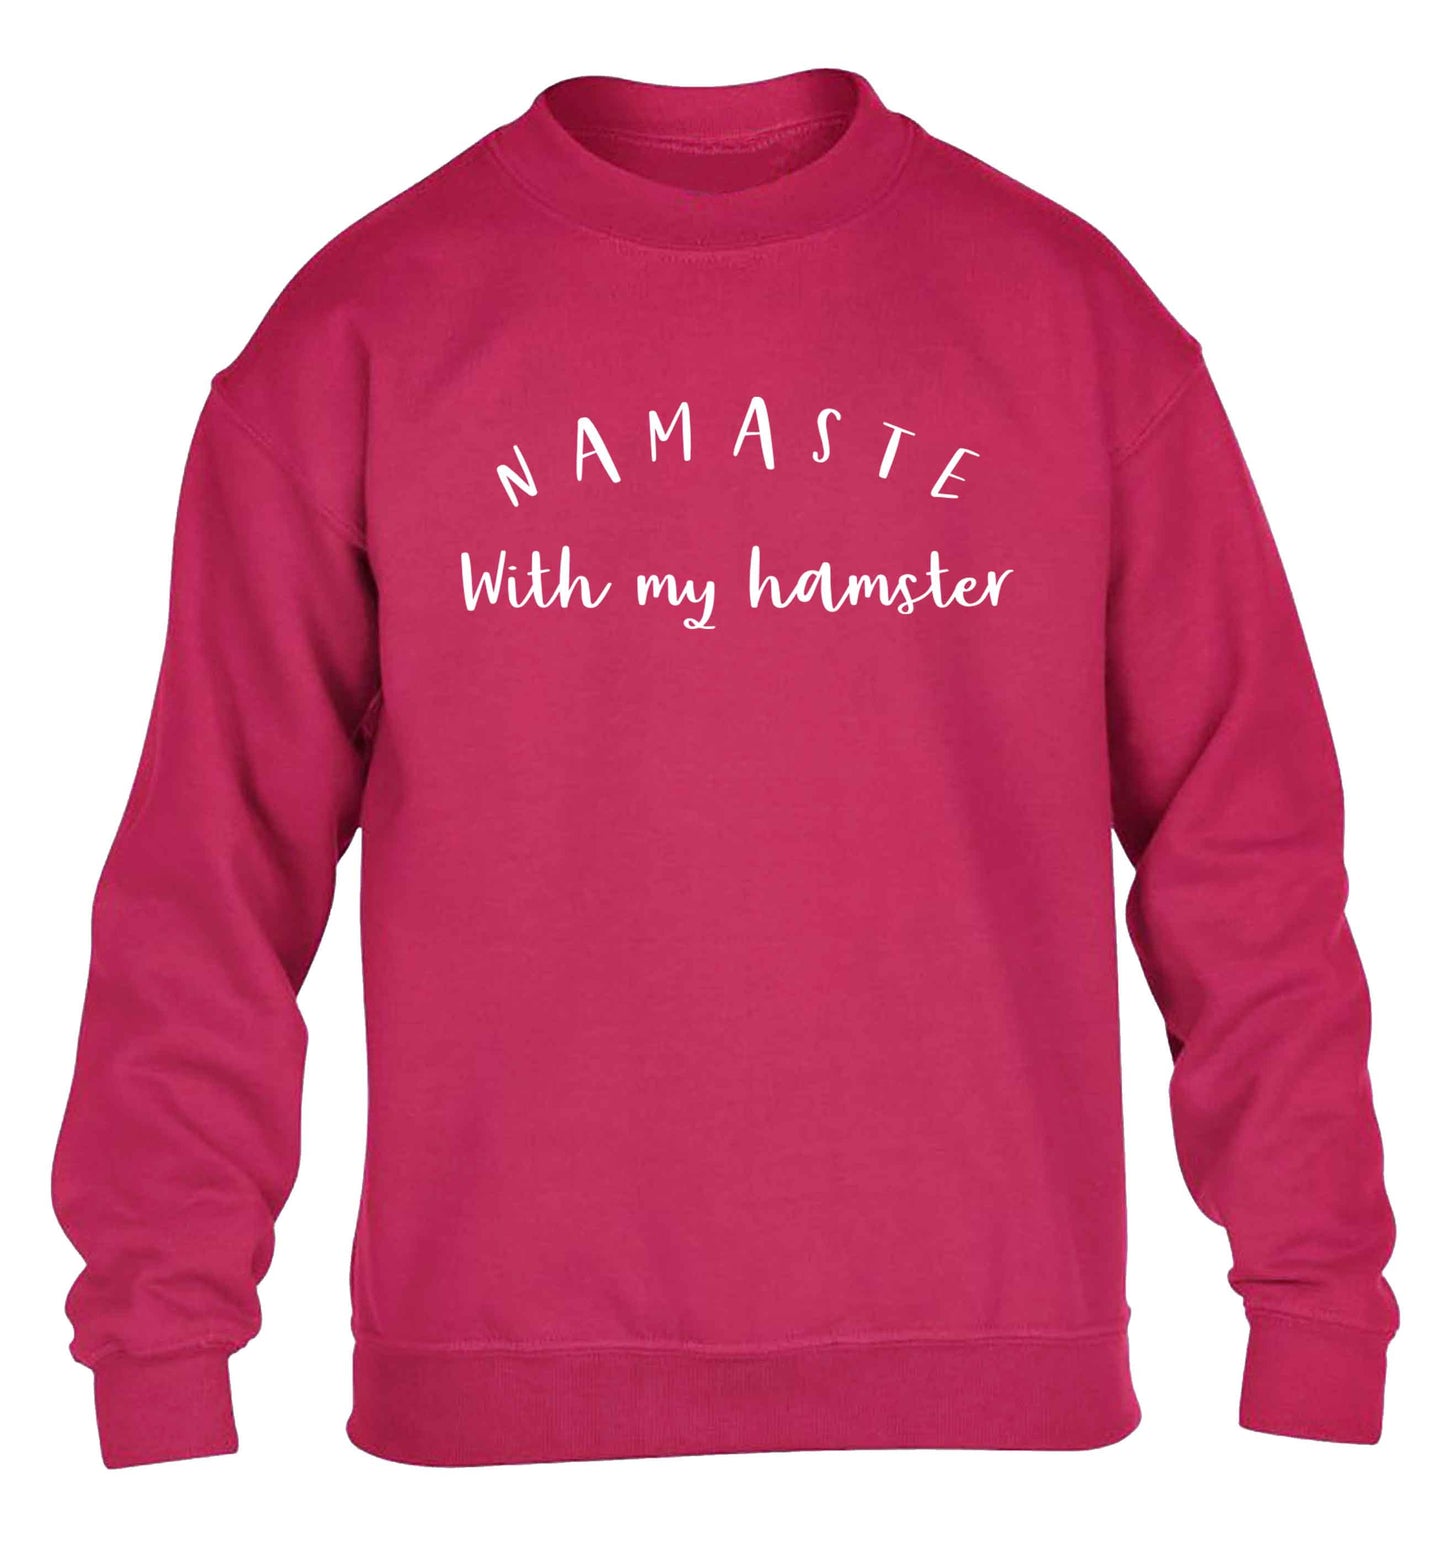 Namaste with my hamster children's pink sweater 12-13 Years